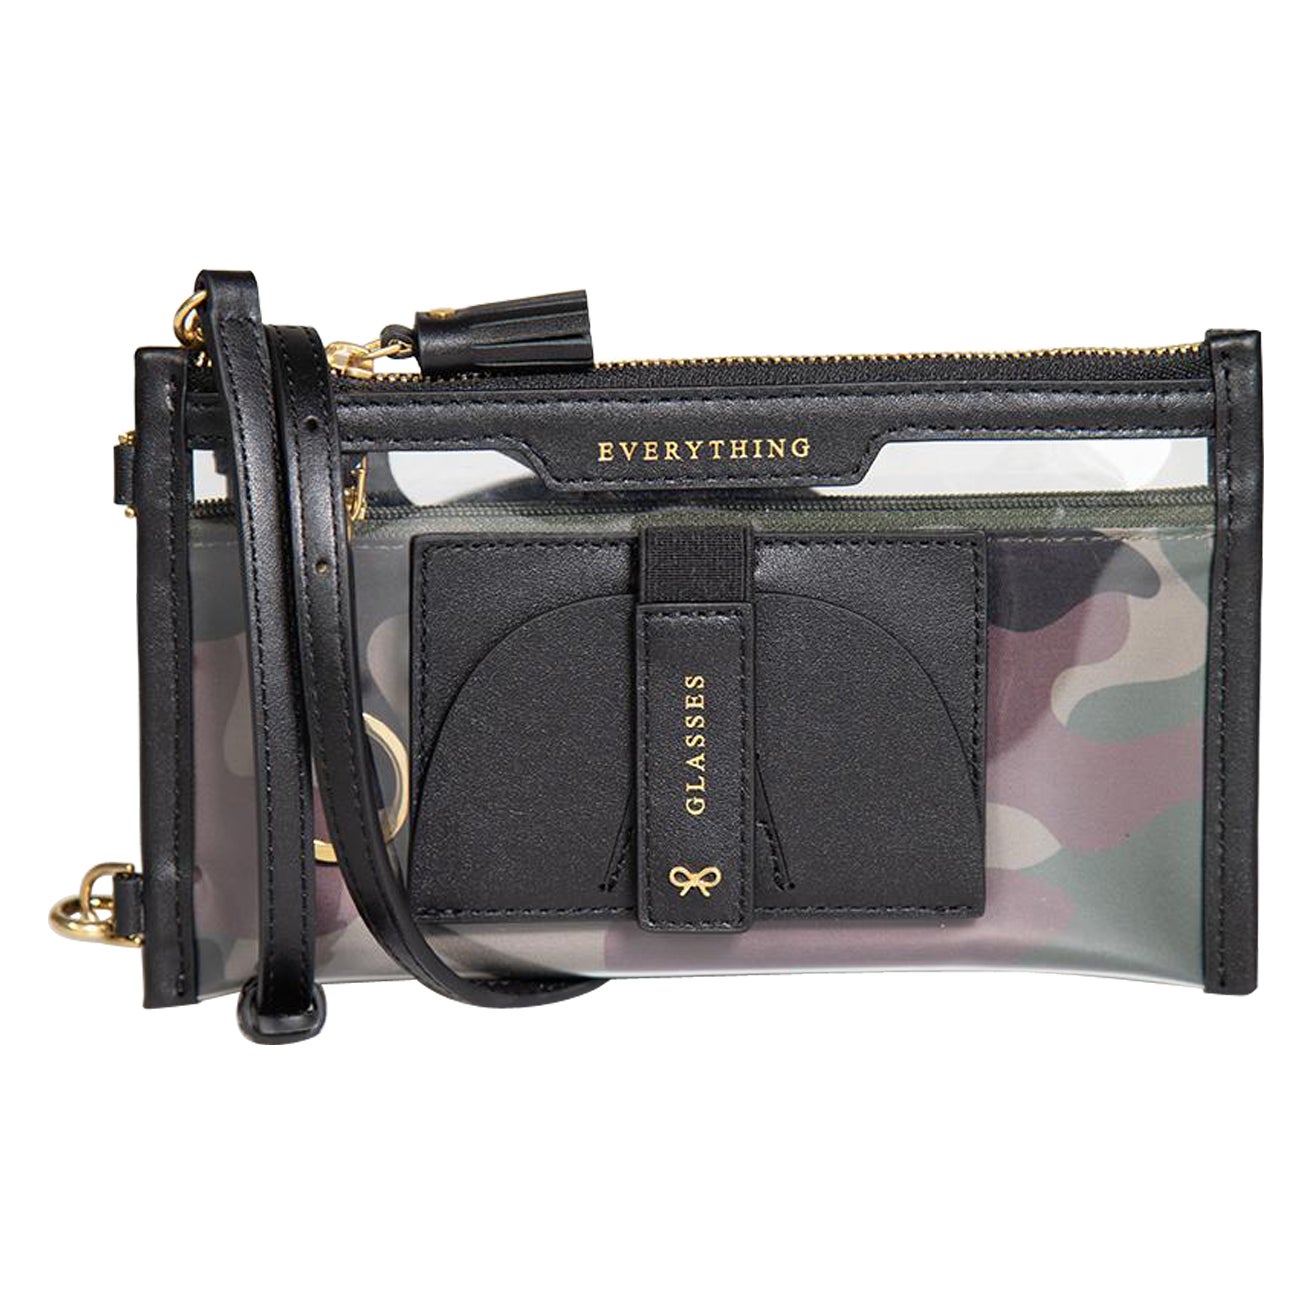 Anya Hindmarch Everything Leather Trim Pouch Bag For Sale